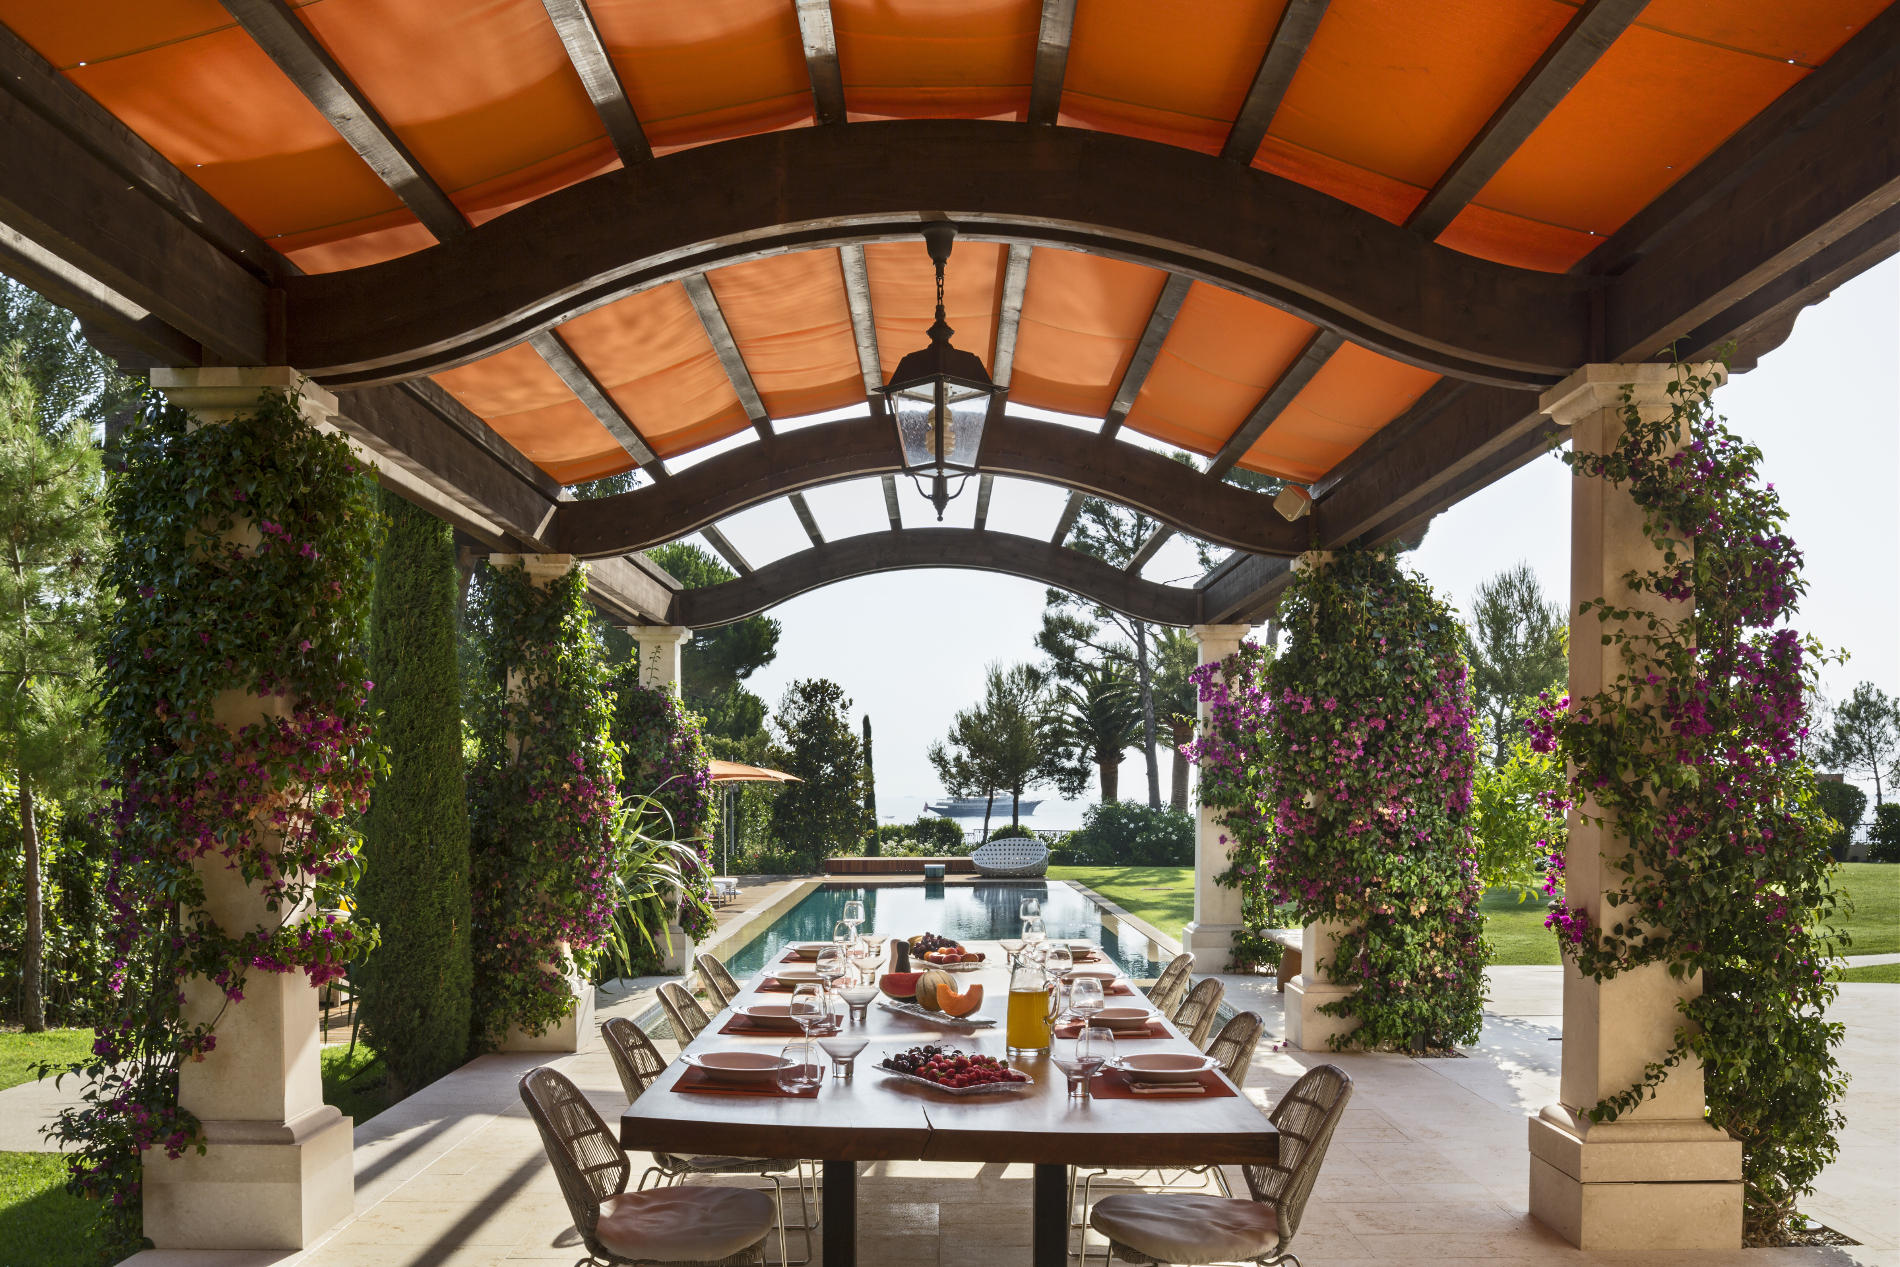 An awning-covered pergola provides a colorful, shaded space for outdoor dining and views across the pool to the Mediterranean Sea. (Photo credit: Peter Aaron/OTTO for Robert A.M. Stern Architects)